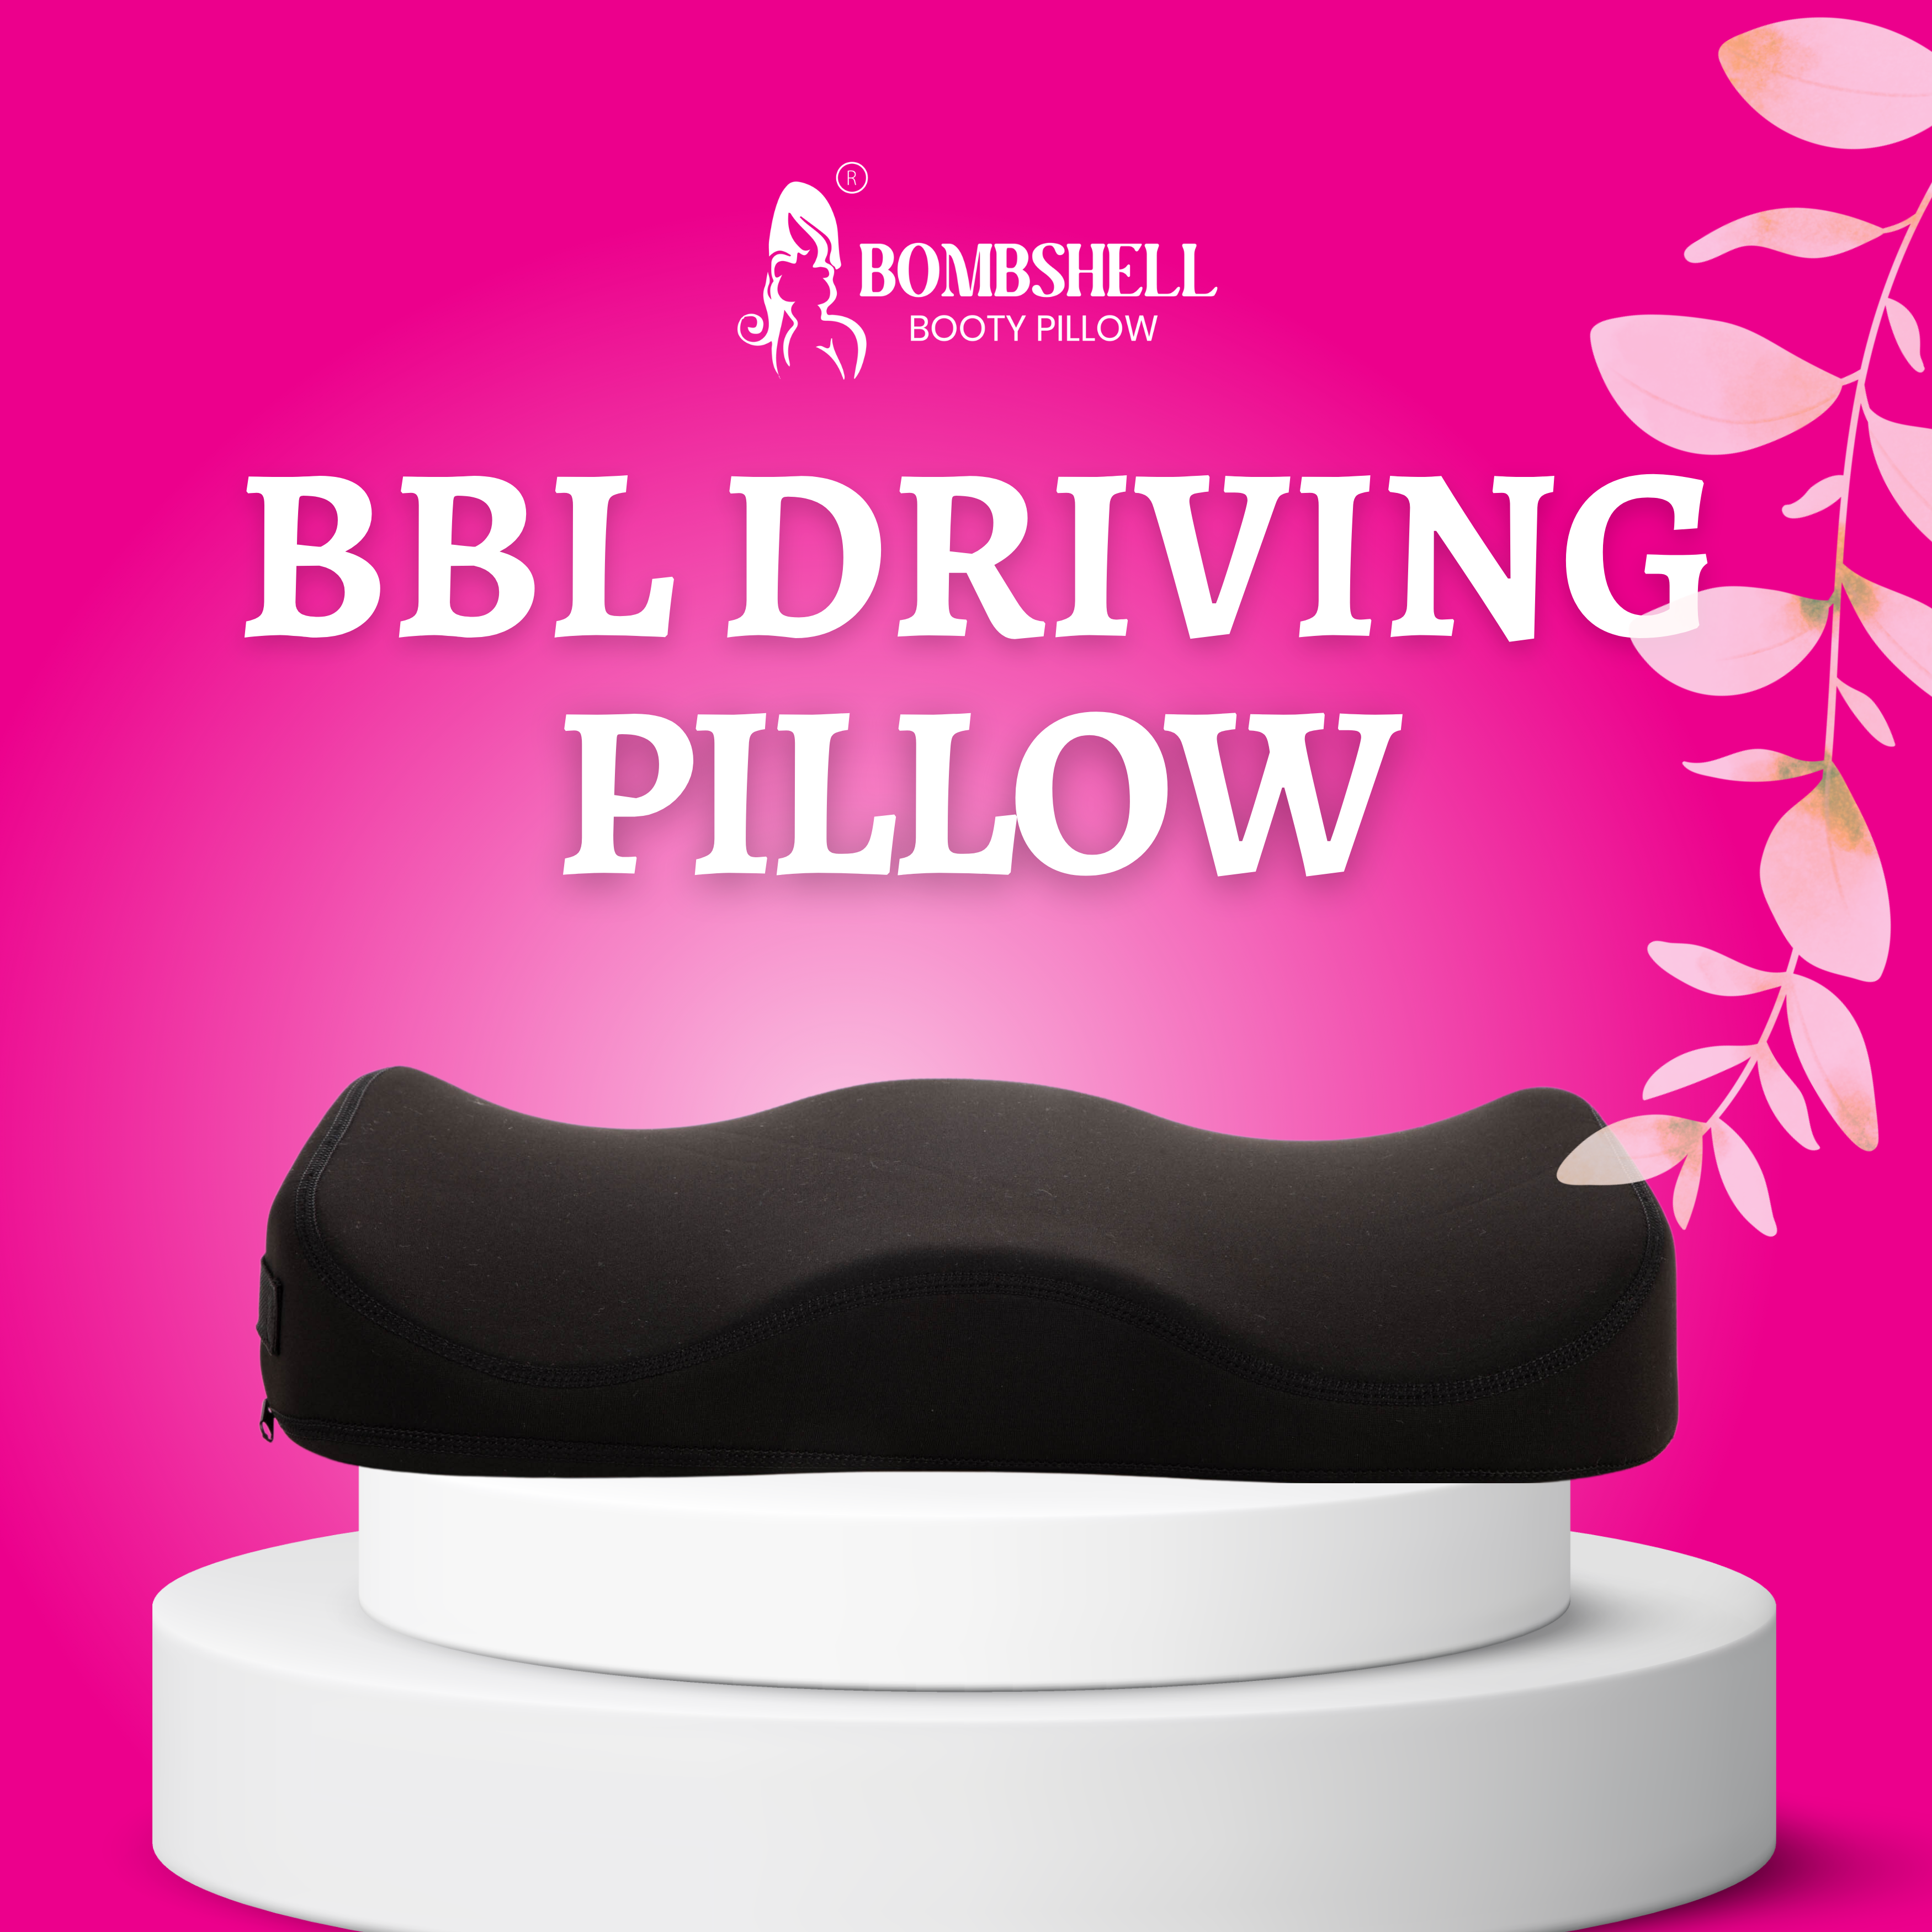 Why Choose a BBL Pillow for Driving?